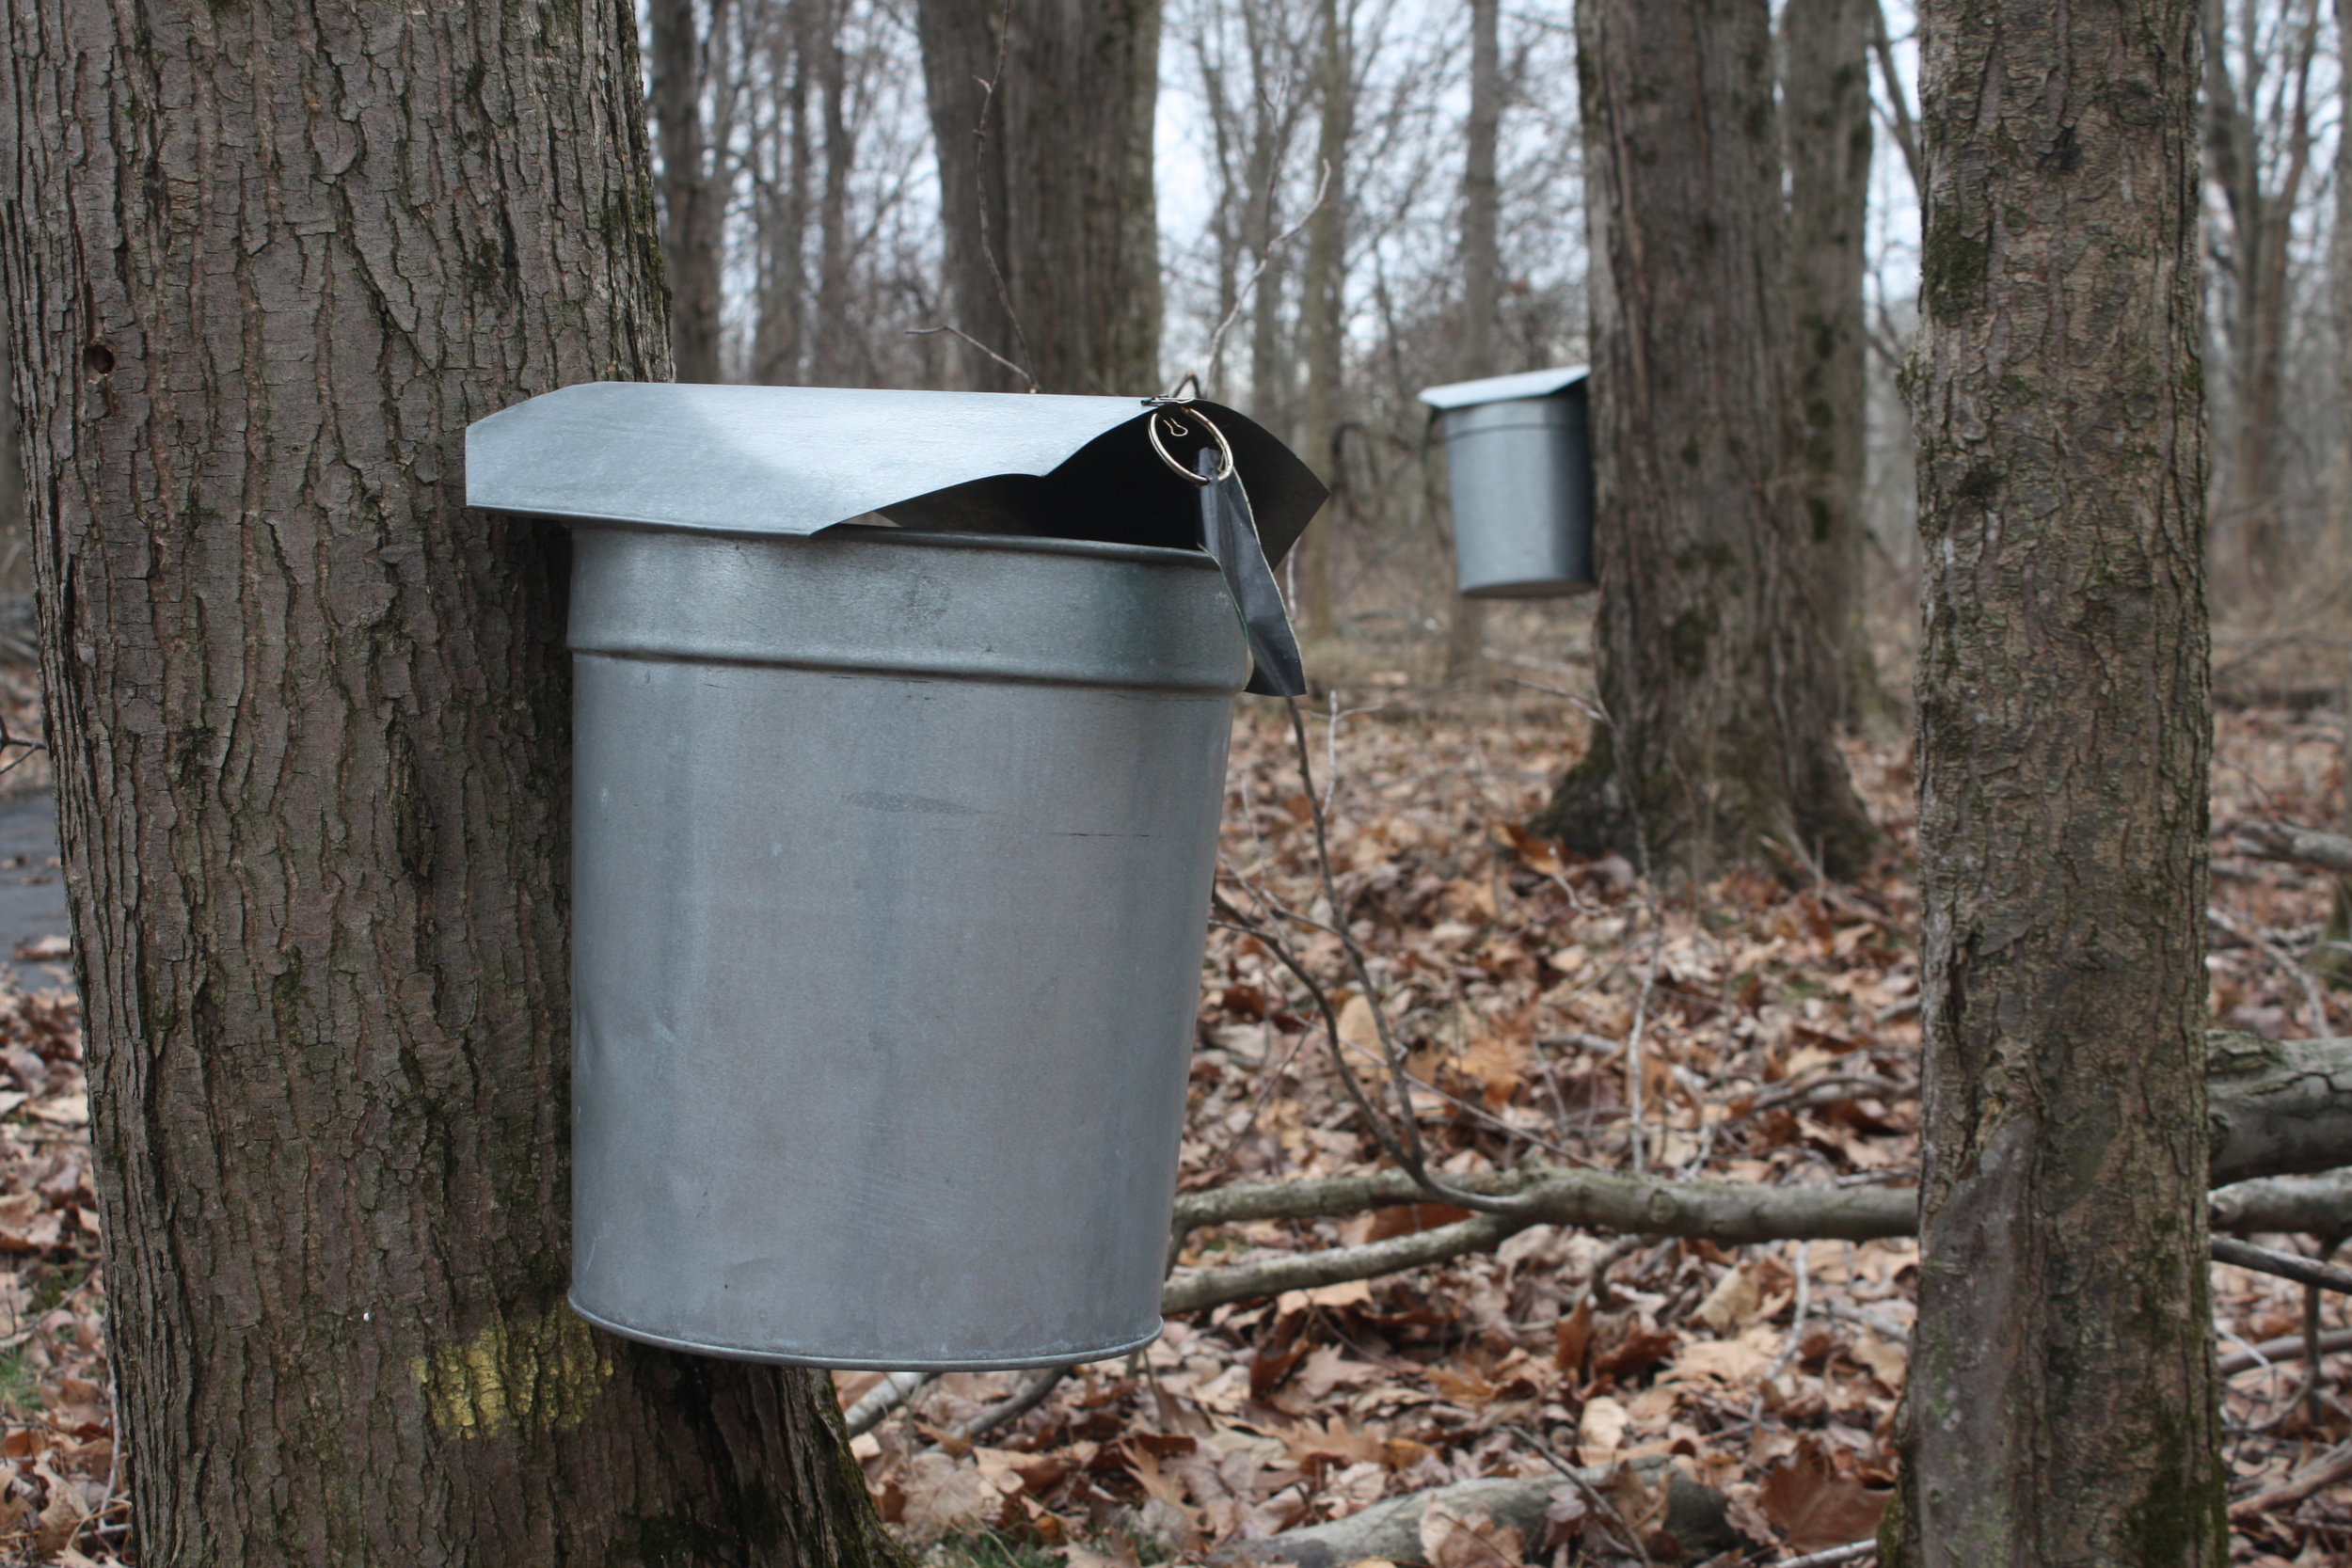 Metal buckets collecting sap during the Maple Sugaring program